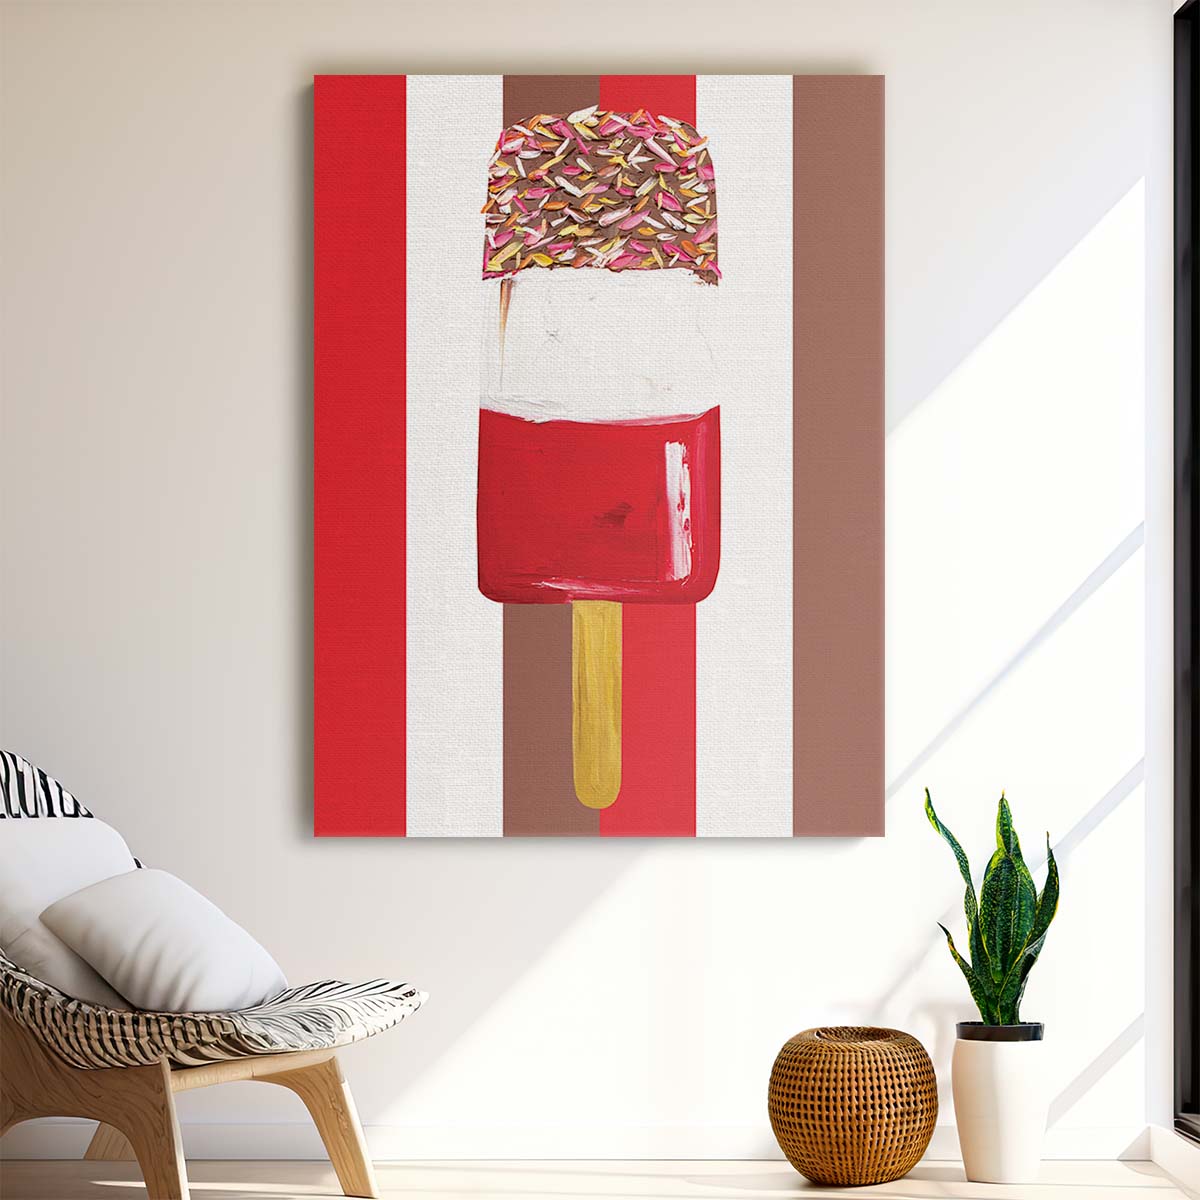 Colorful Ice Cream Popsicle Illustration for Kitchen Wall Art by Luxuriance Designs, made in USA